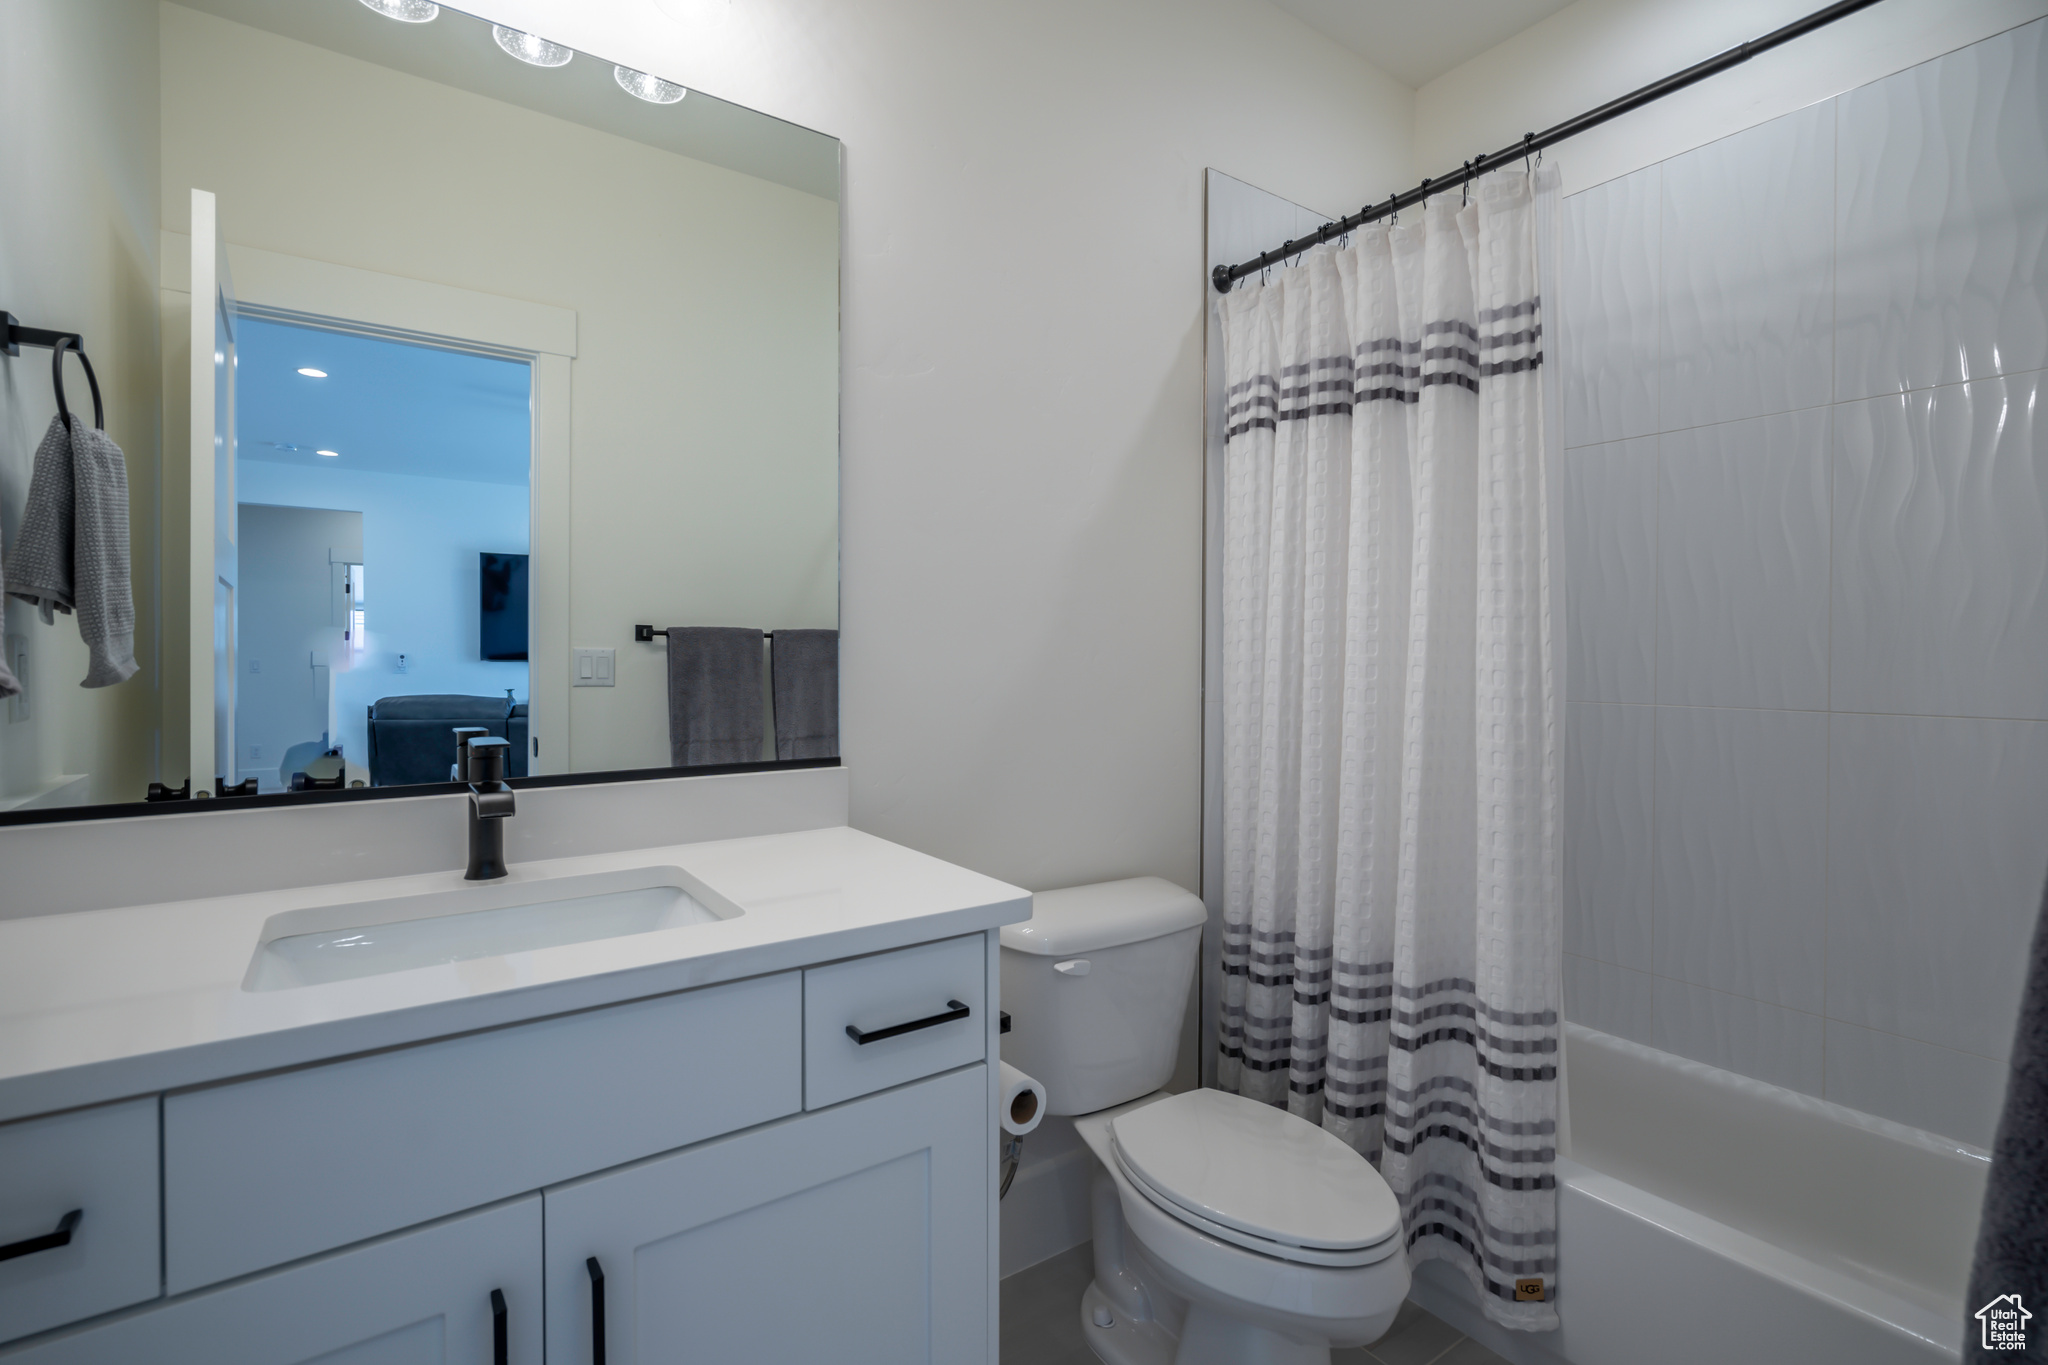 Full bathroom featuring vanity with extensive cabinet space, toilet, and shower / tub combo with curtain